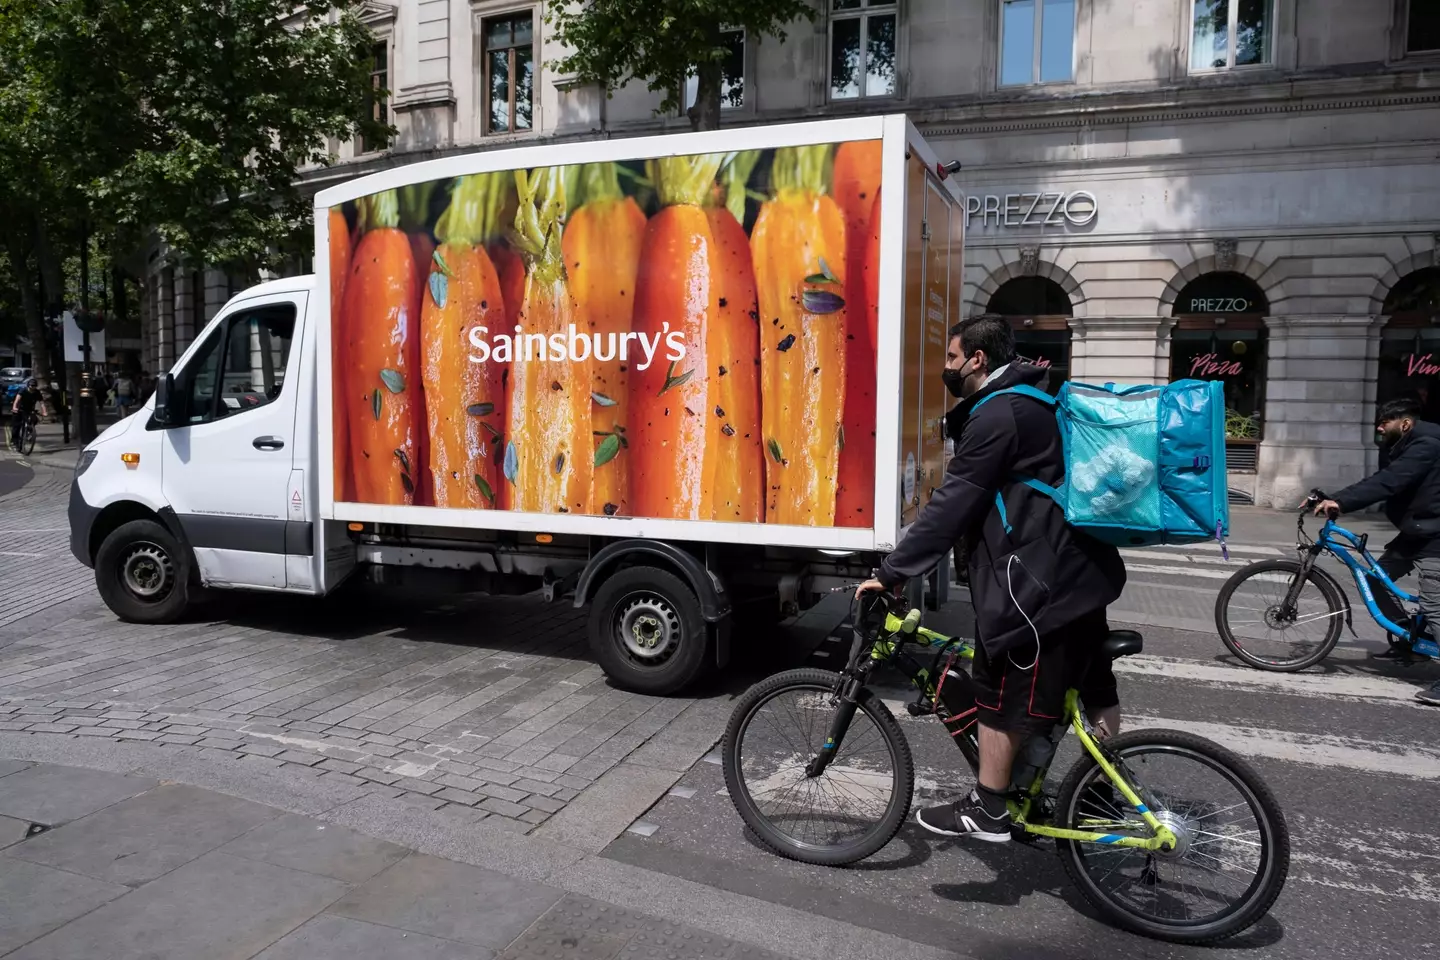 The delivery person picked up an order from Sainsbury's.